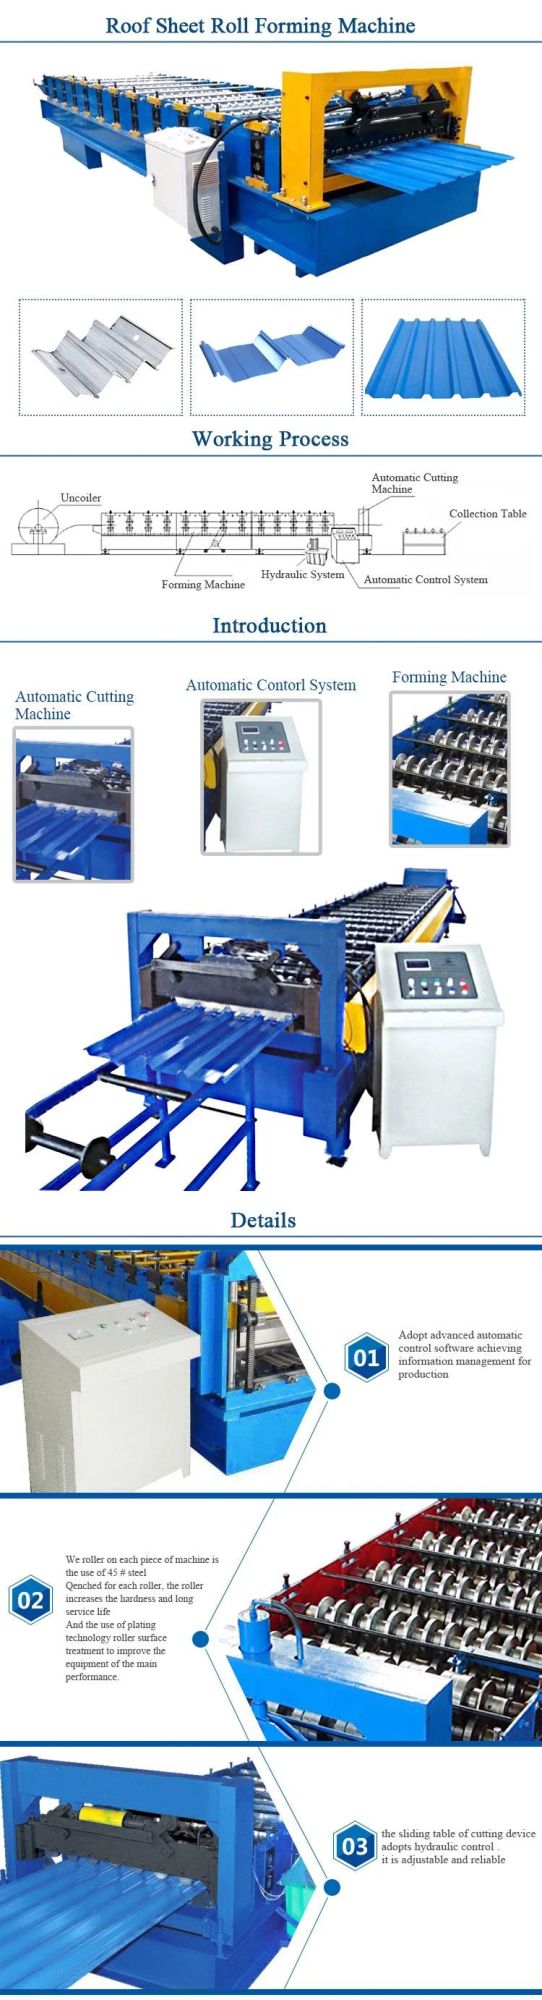 Metal Roofing Panel Roll Forming Machine-Roof Sheet Forming Machinery